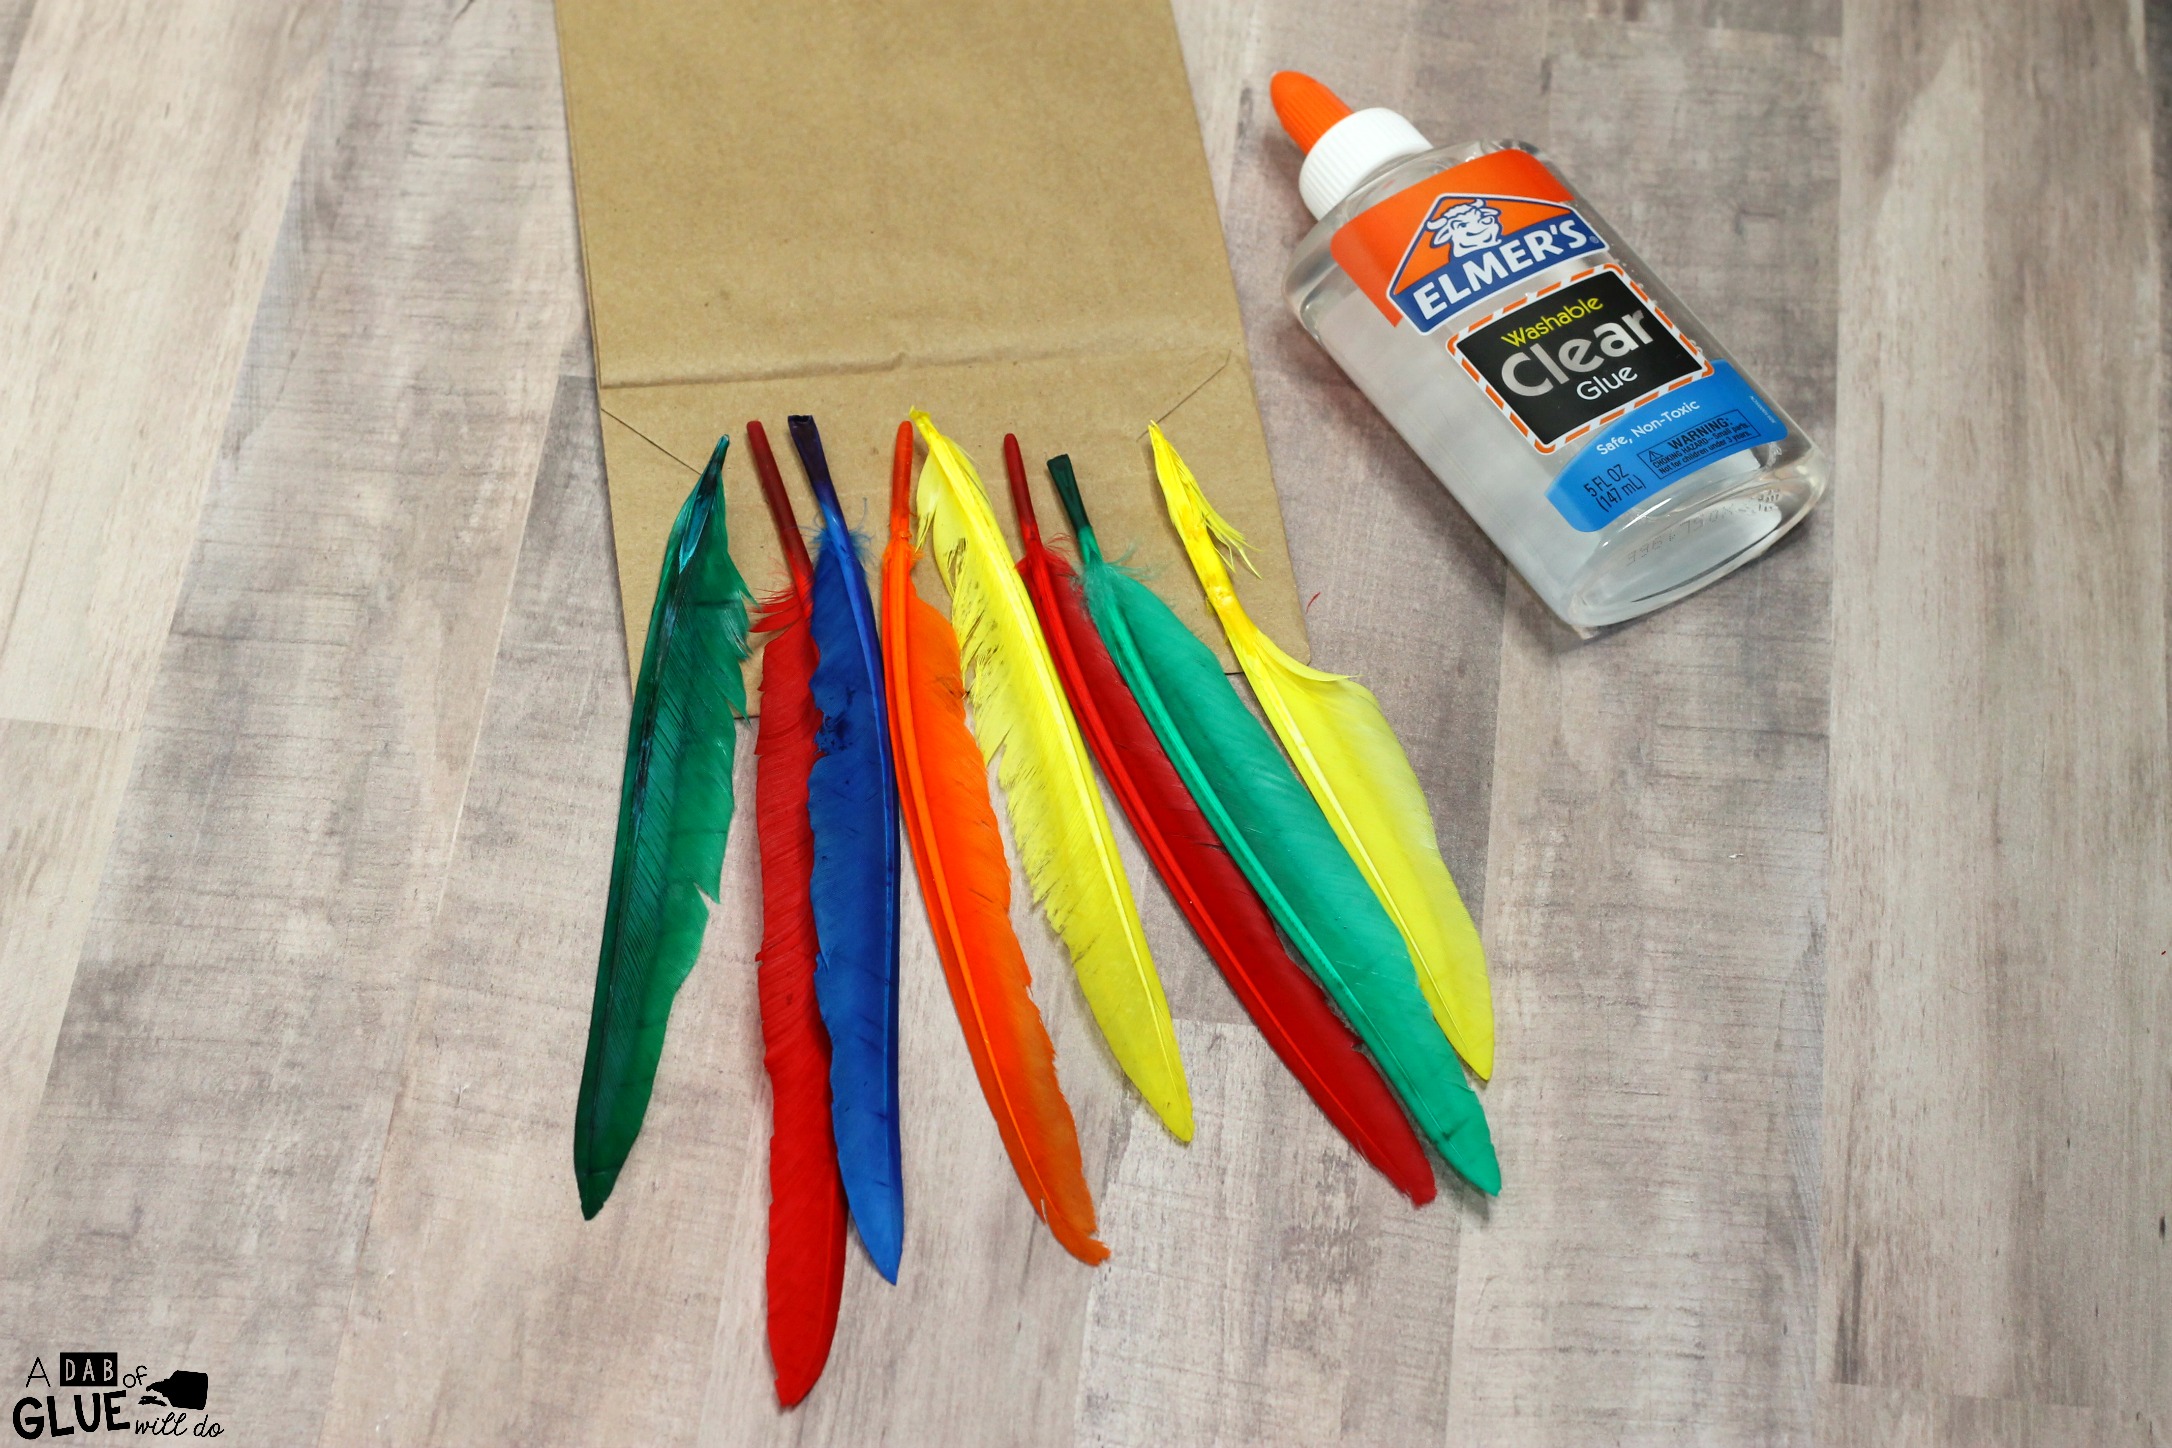 Whether you are looking for something for your students to do during your Thanksgiving party or learning about the feathered birds, this Paper Bag Turkey Puppet Craft is the perfect craft to make.